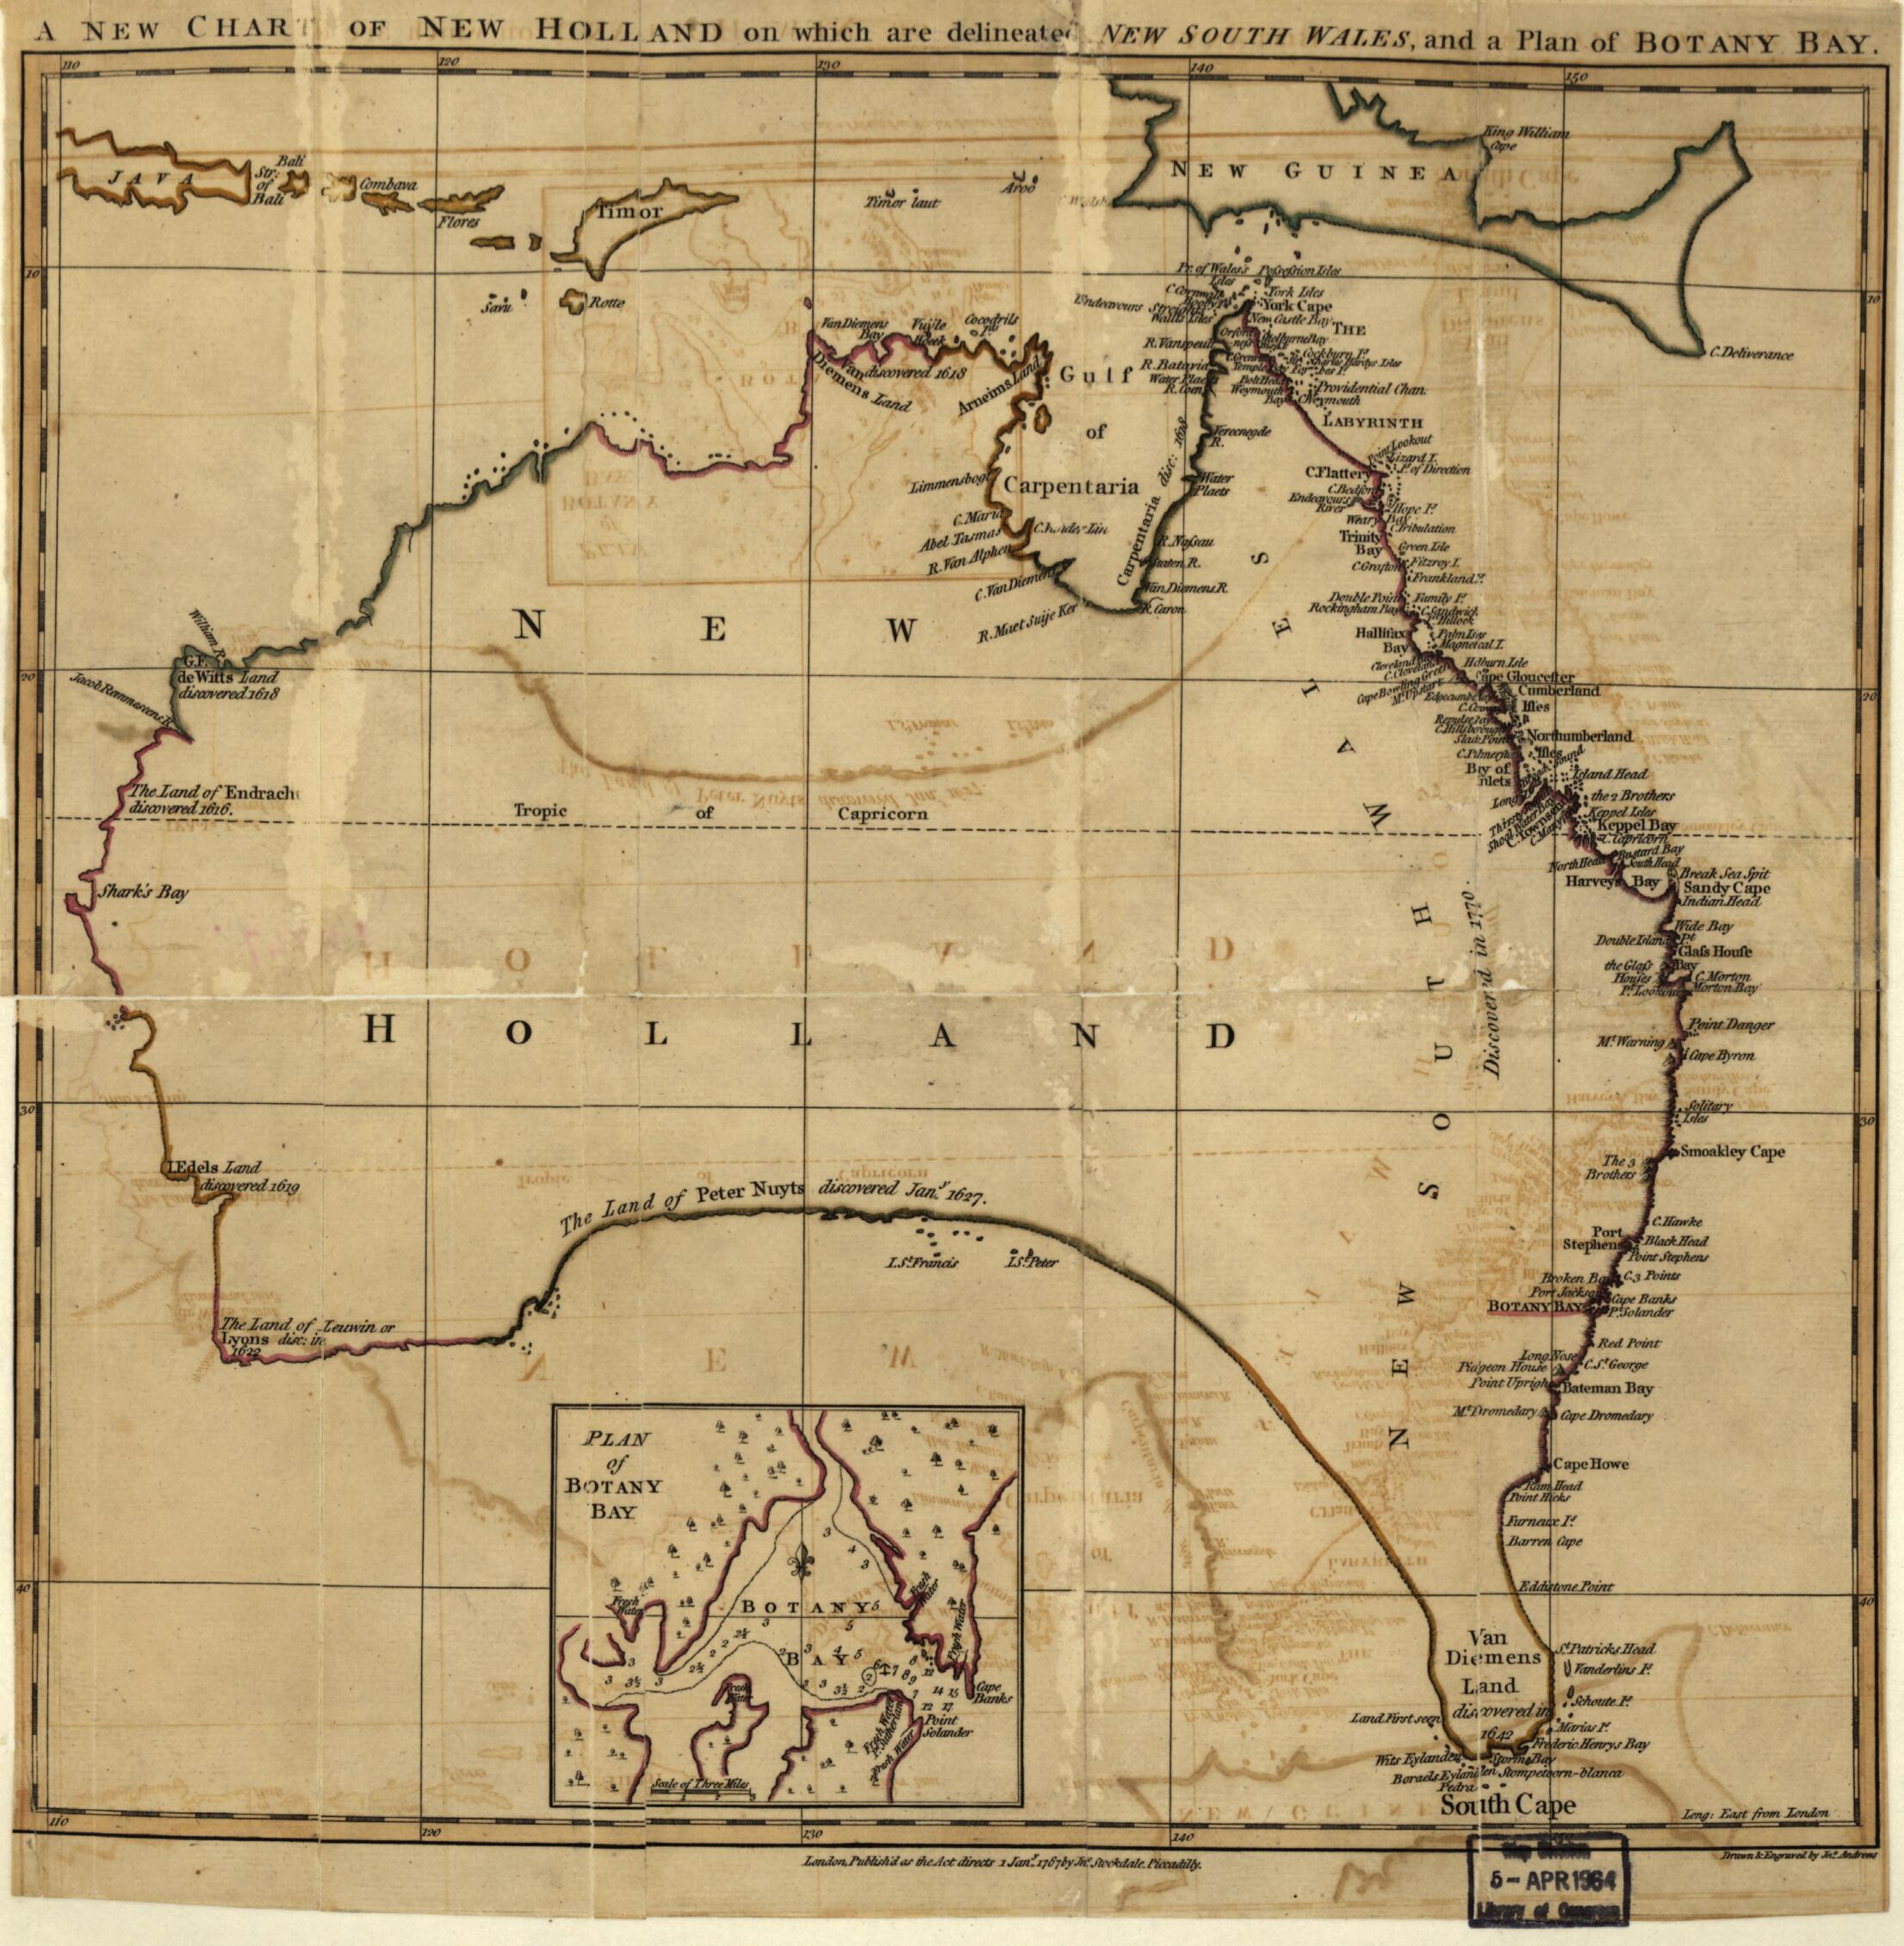 This old map of A New Chart of New Holland On Which Are Delineated New South Wale, and a Plan for Botany Bay from 1767 was created by John Stockdale in 1767